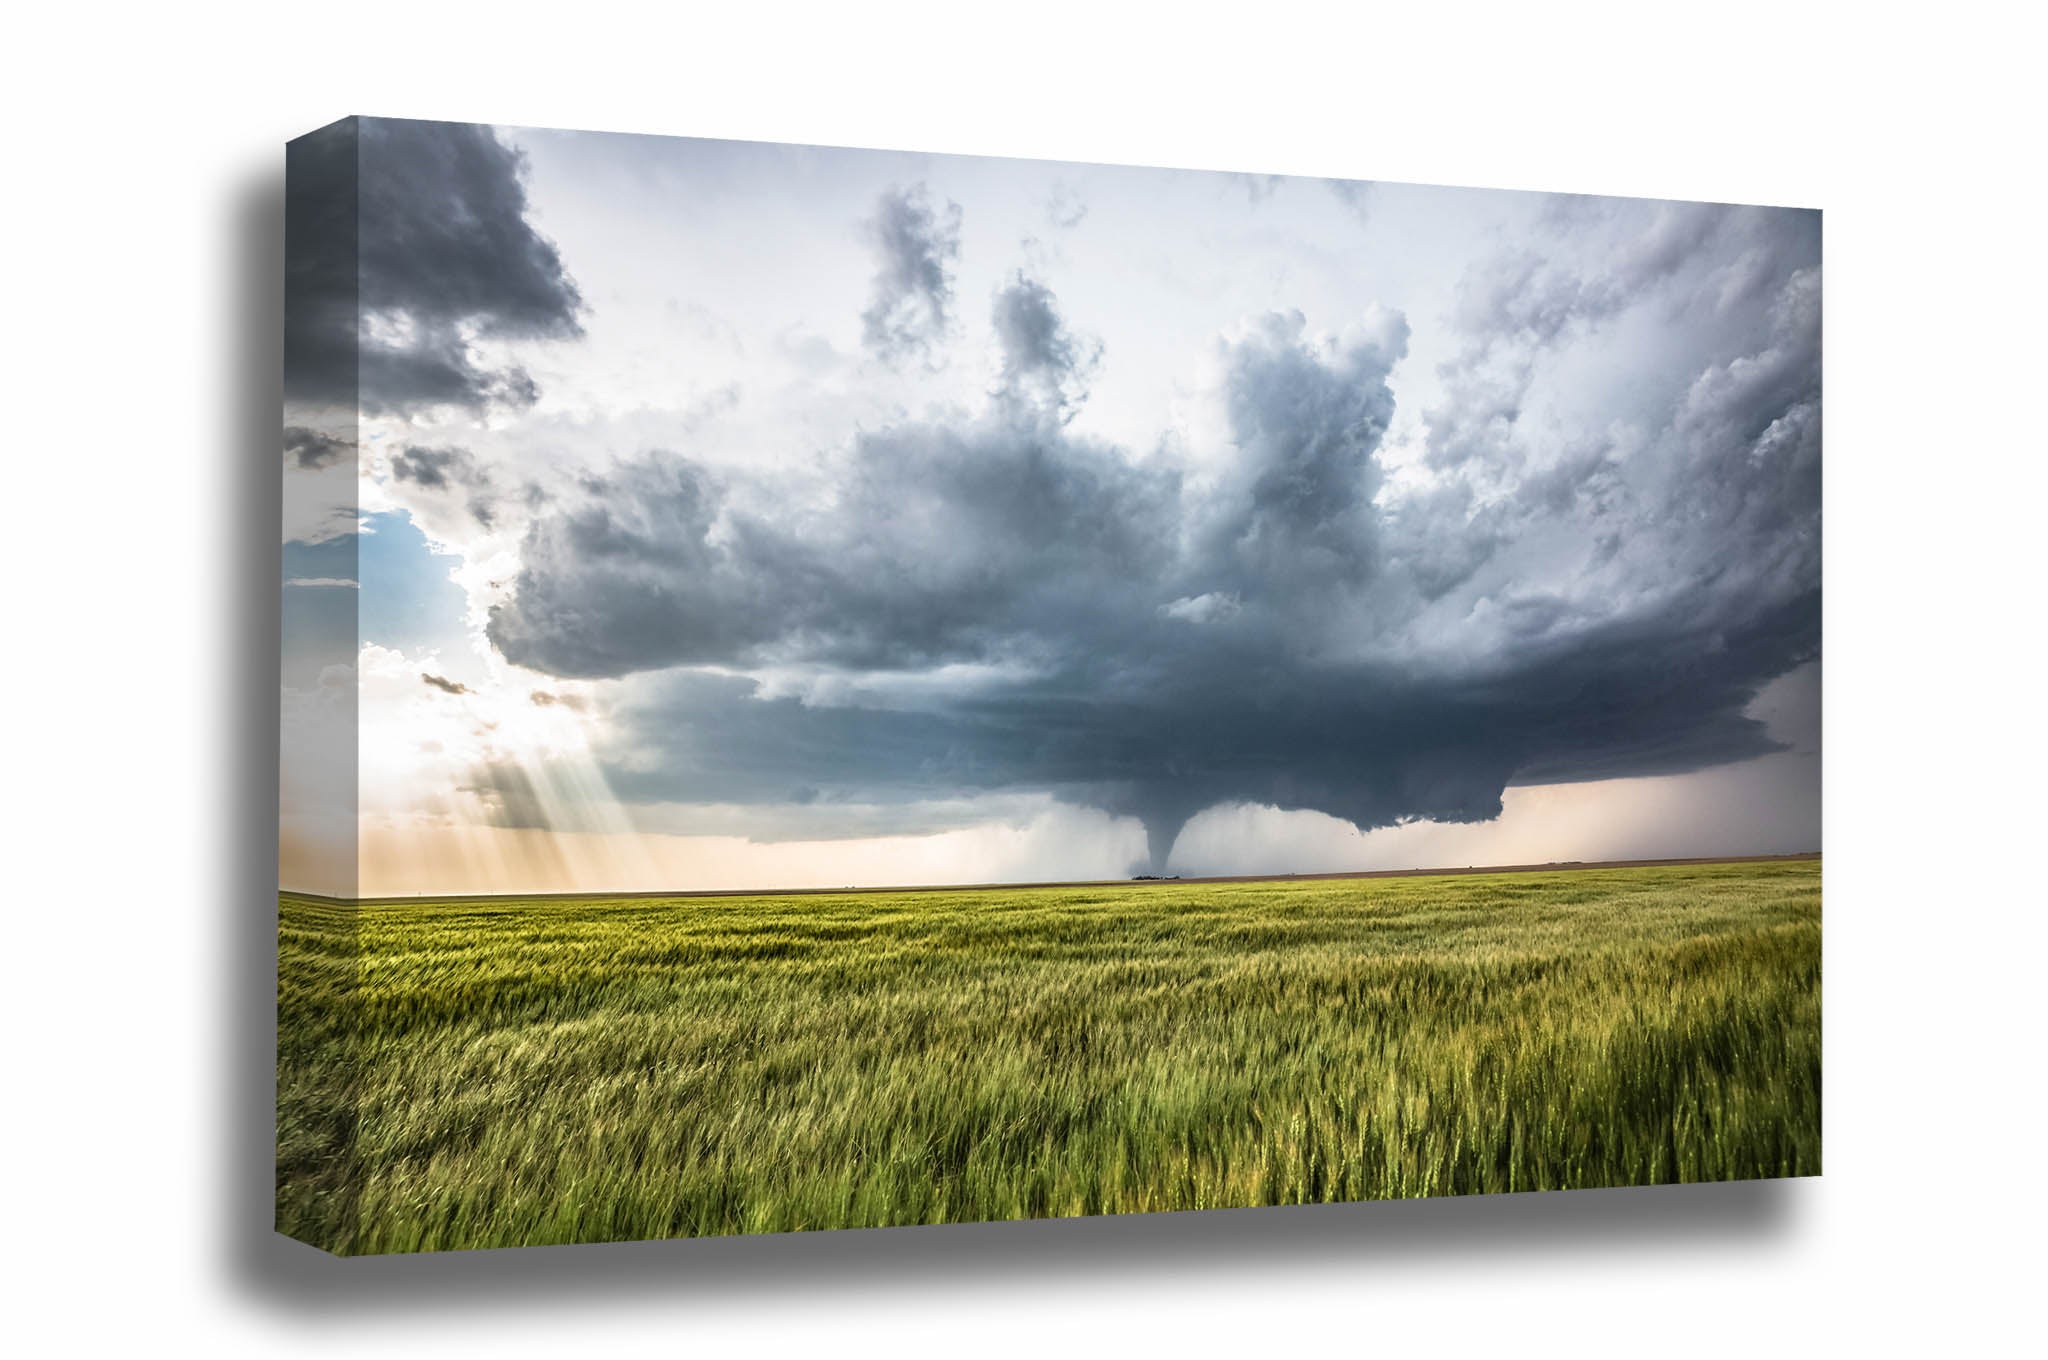 Extreme weather canvas wall art of a distant tornado over a wheat field as sunlight breaks through clouds on a stormy spring day in Kansas by Sean Ramsey of Southern Plains Photography.